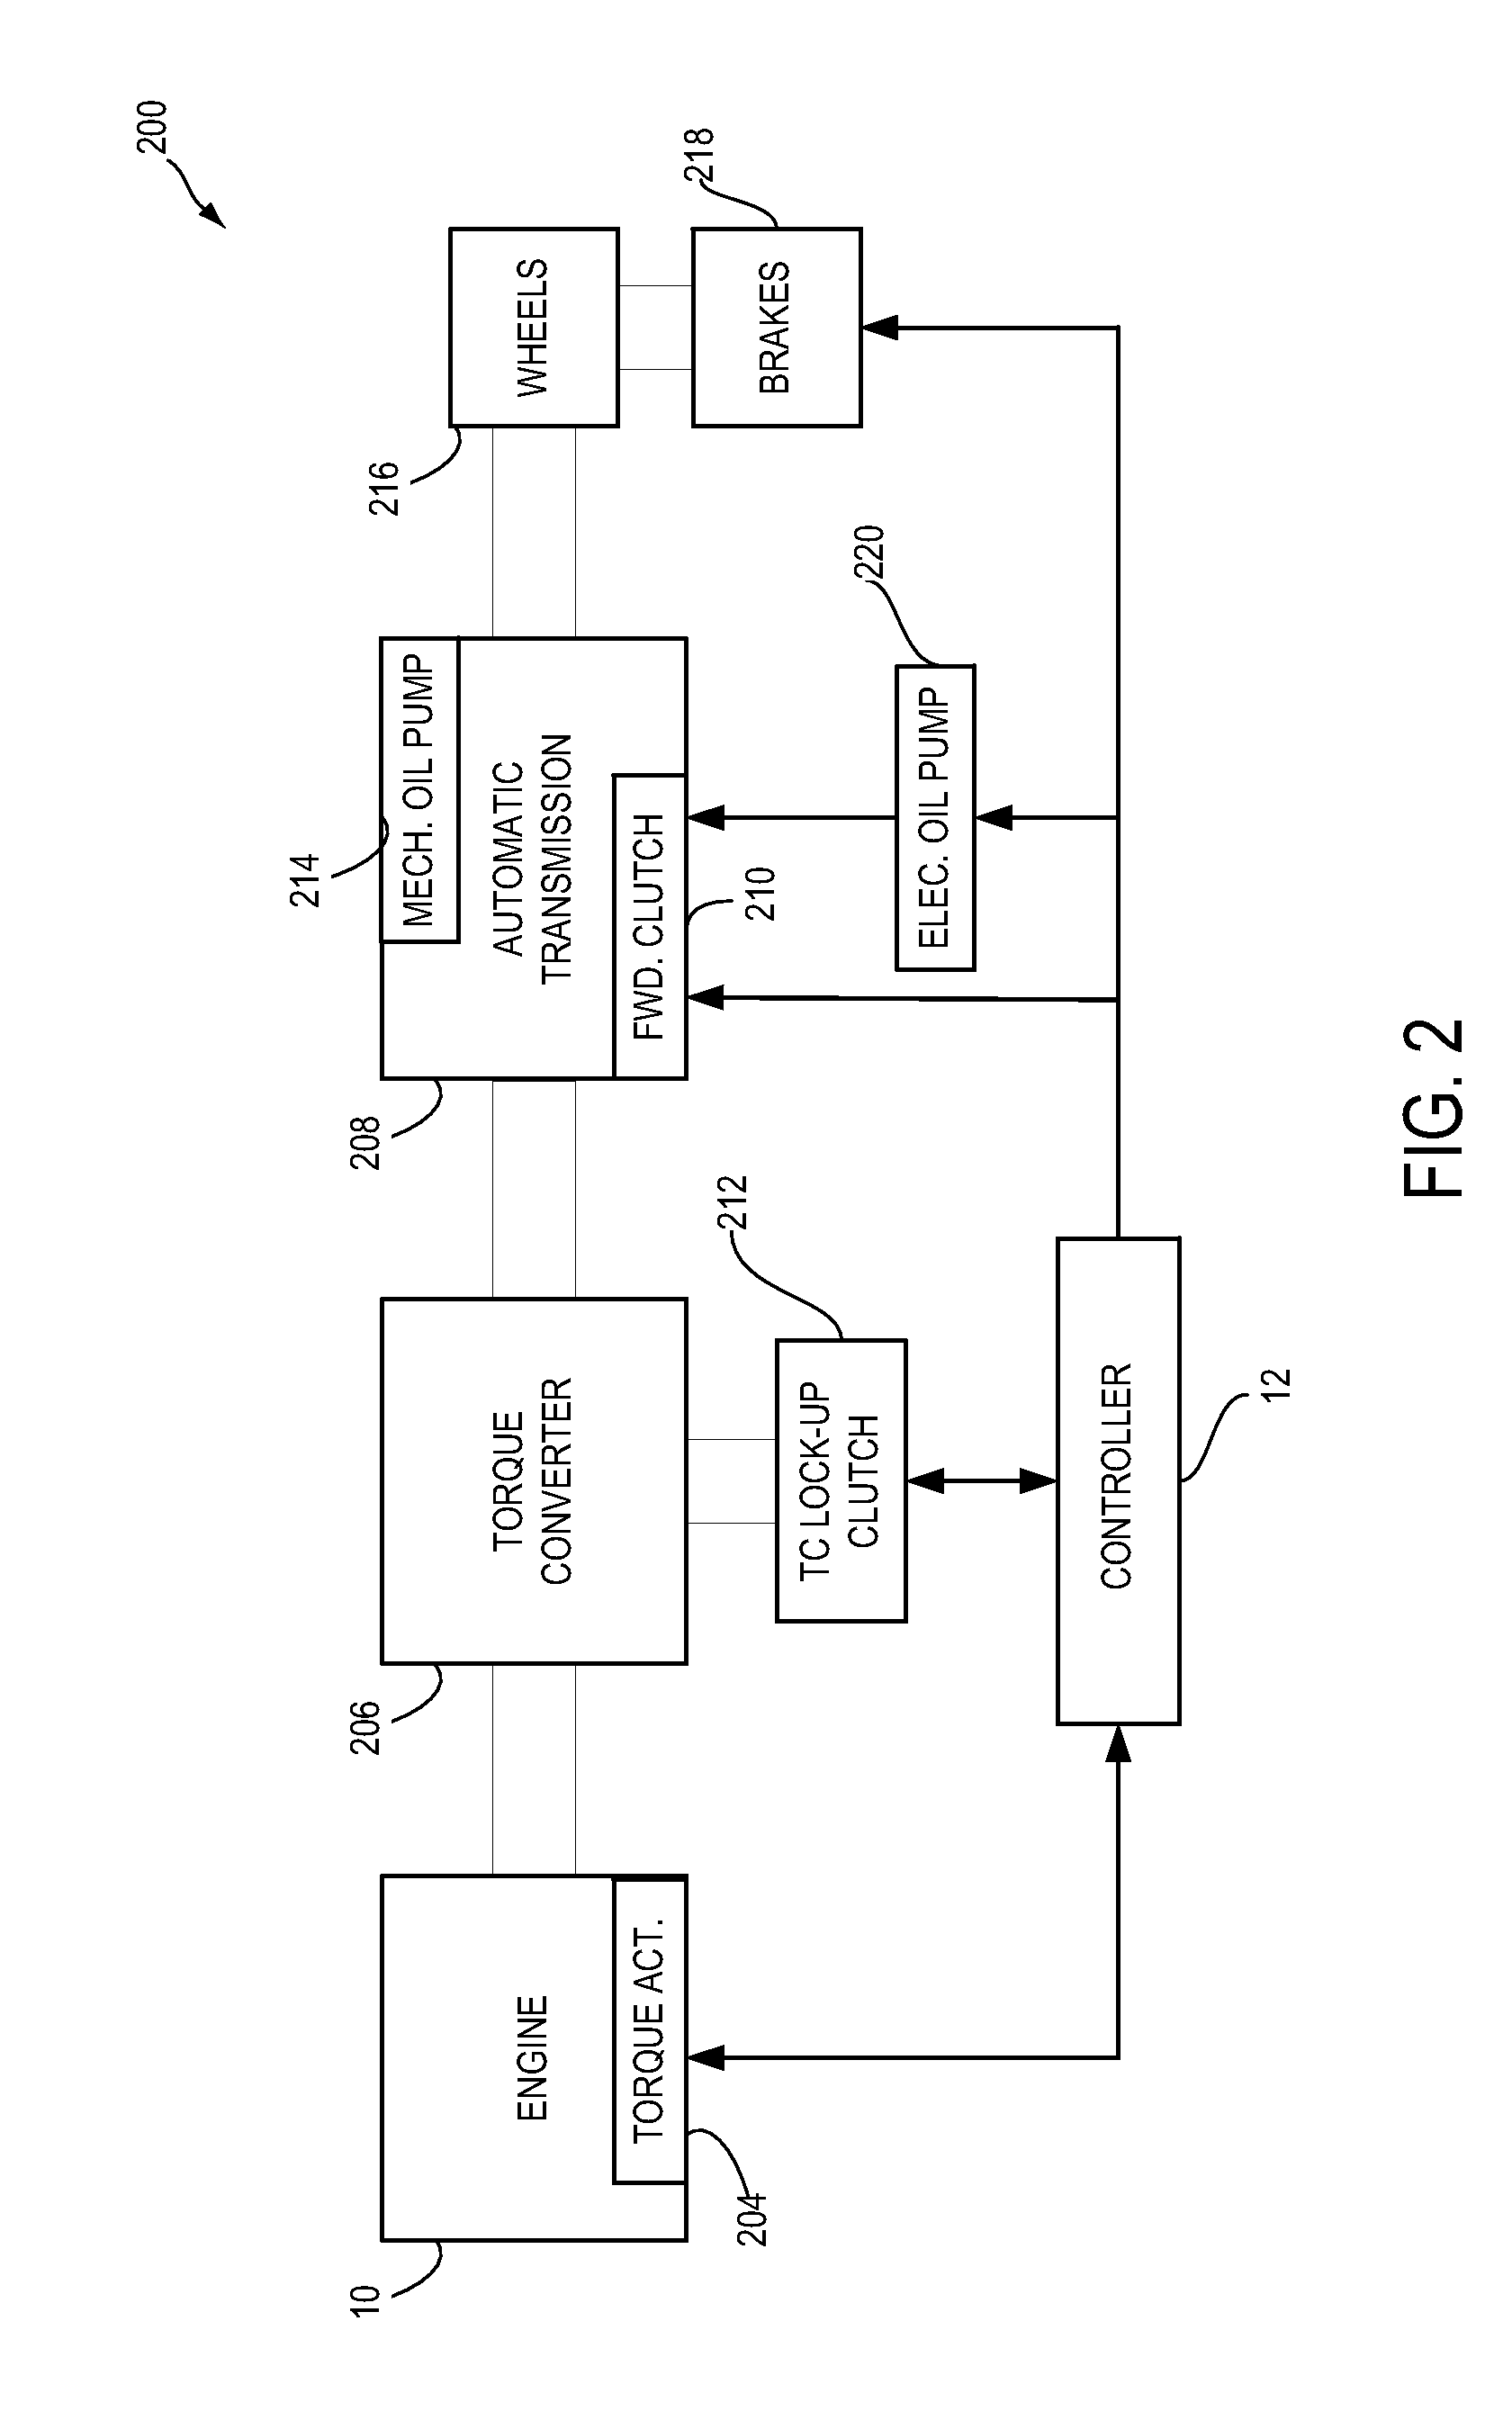 Method for controlling an engine that may be automatically stopped